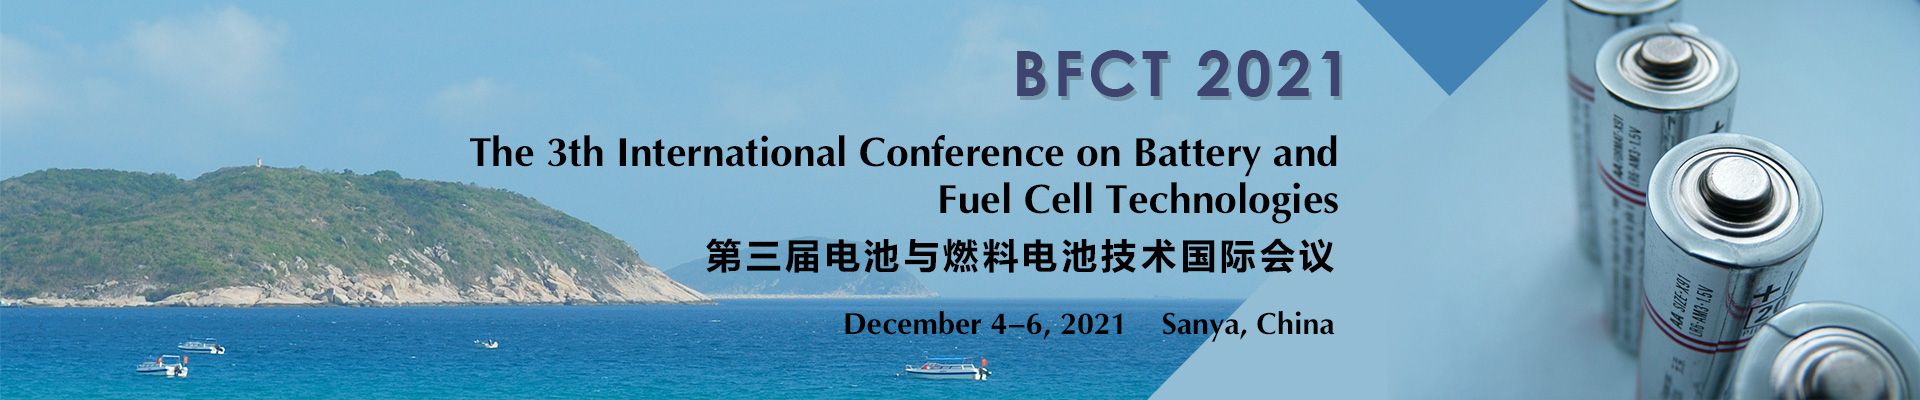 The 3th Int'l Conference on Battery and Fuel Cell Technologies (BFCT 2021), Sanya, Hainan, China